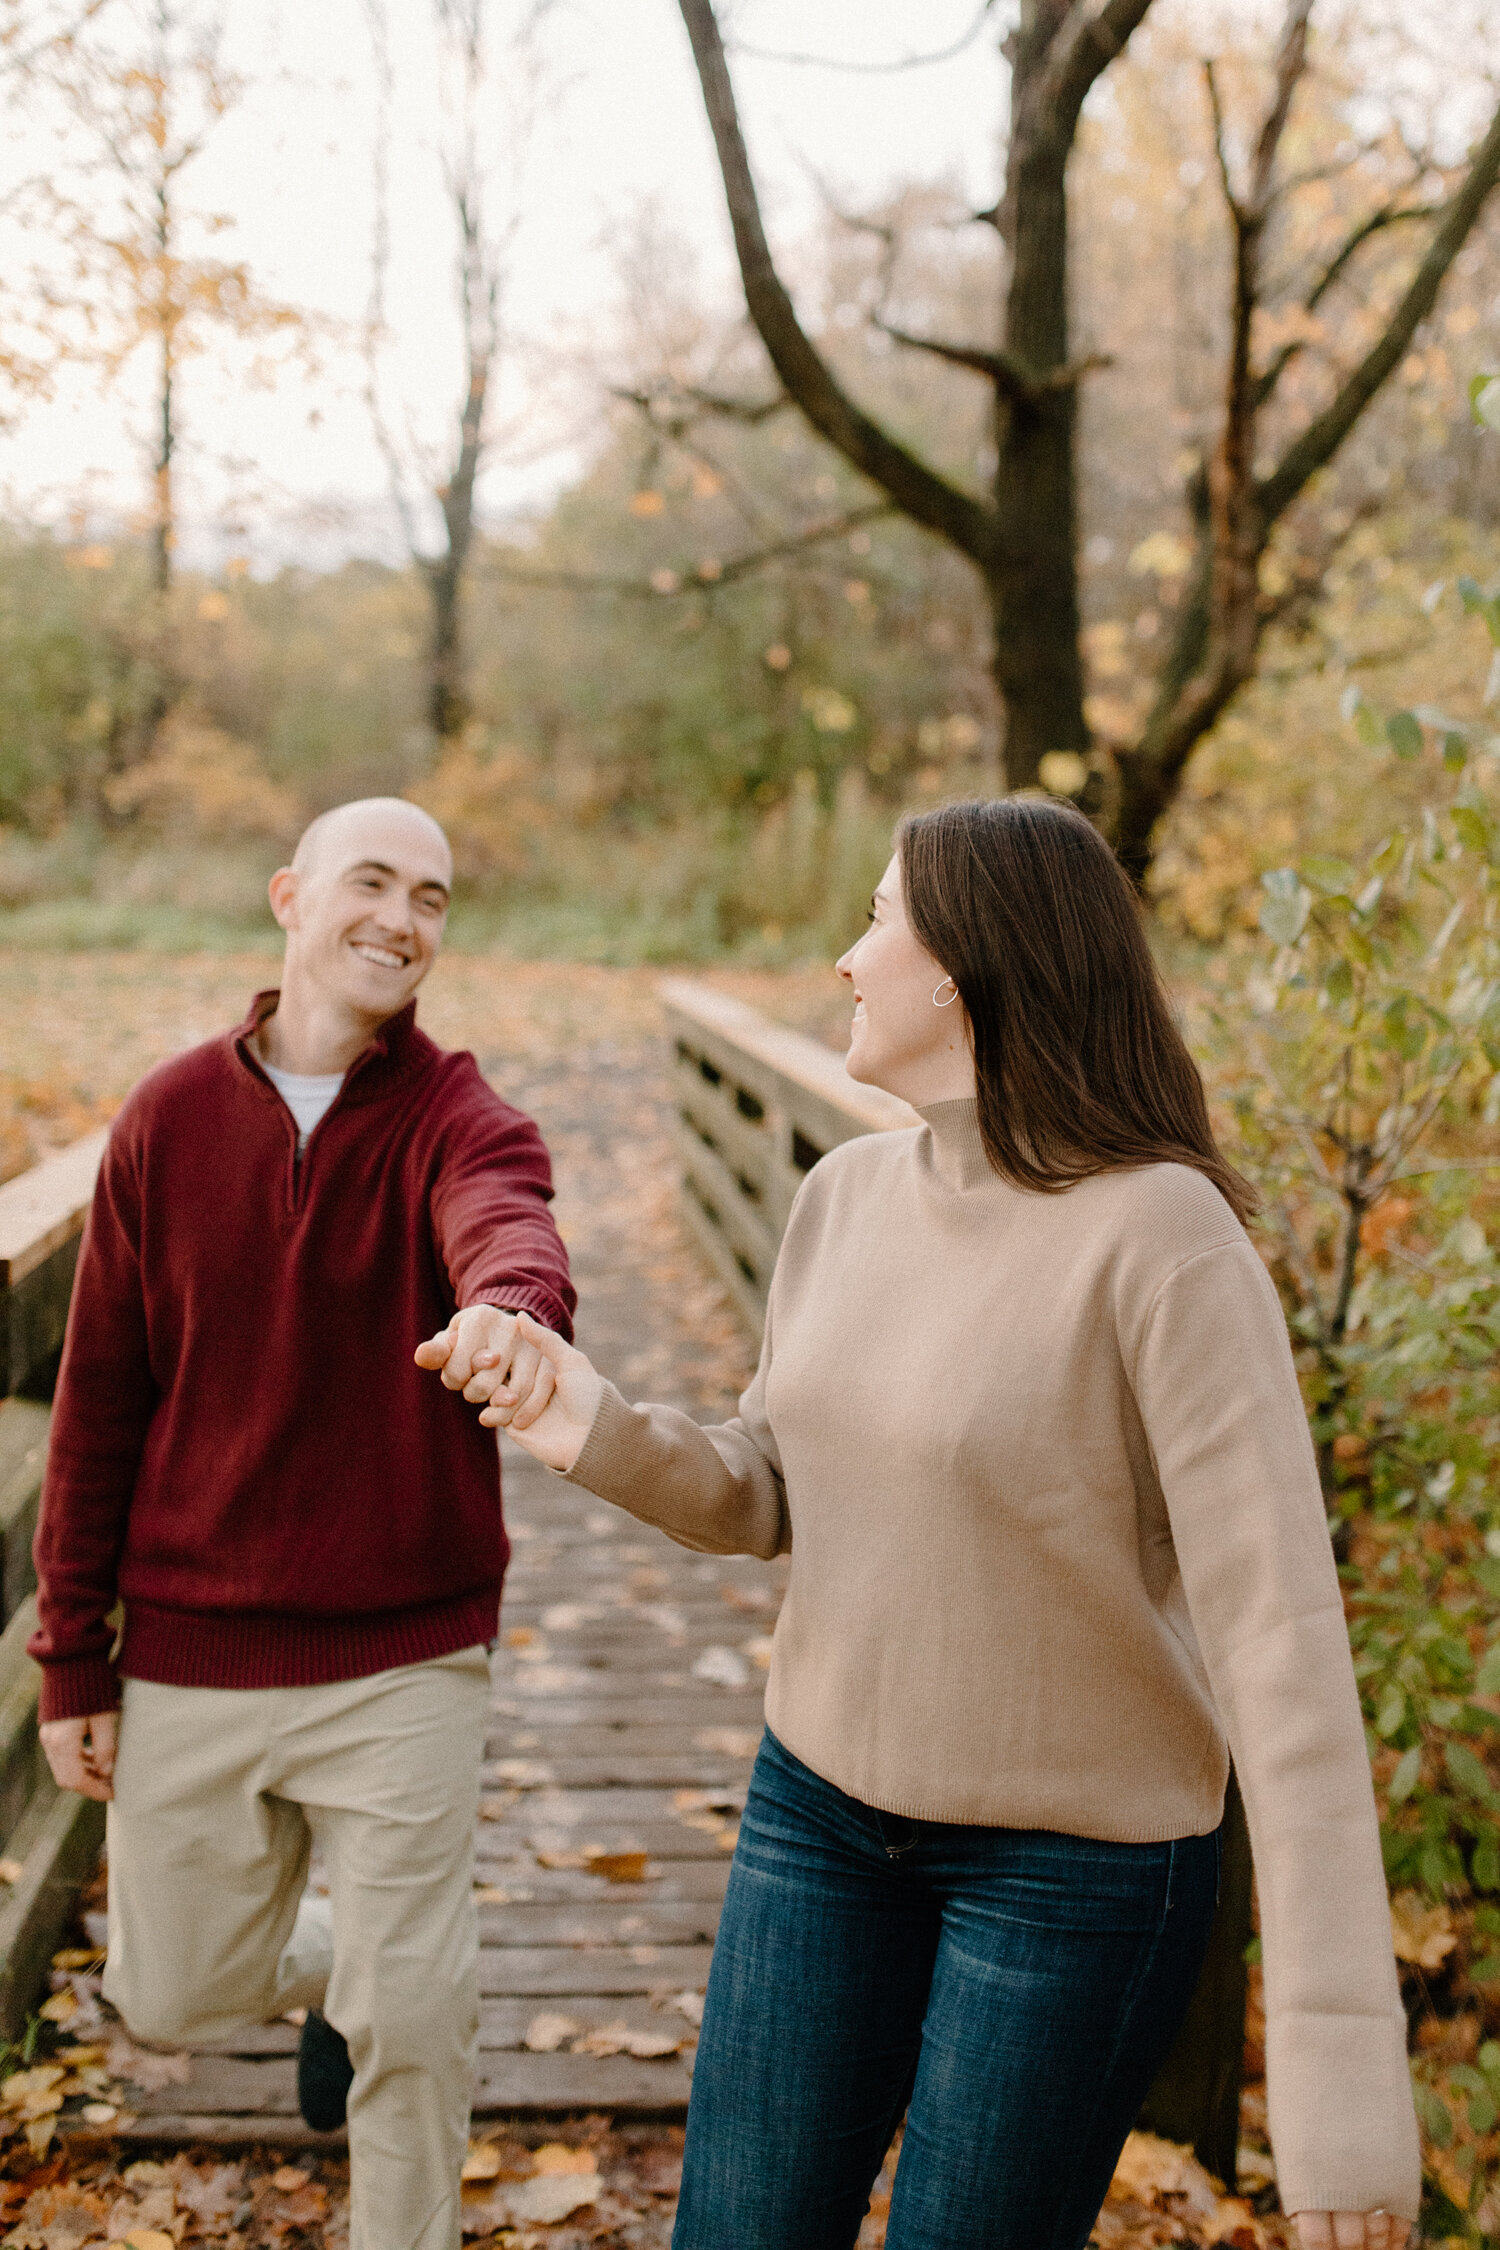  During this crisp autumn engagement session, Chelsea Mason Photography captures this fiance taking her soon-to-be groom’s hand and leading him through a shaded pathway in Ottawa, Canada. autumn engagement session in ottawa canada photographer womens